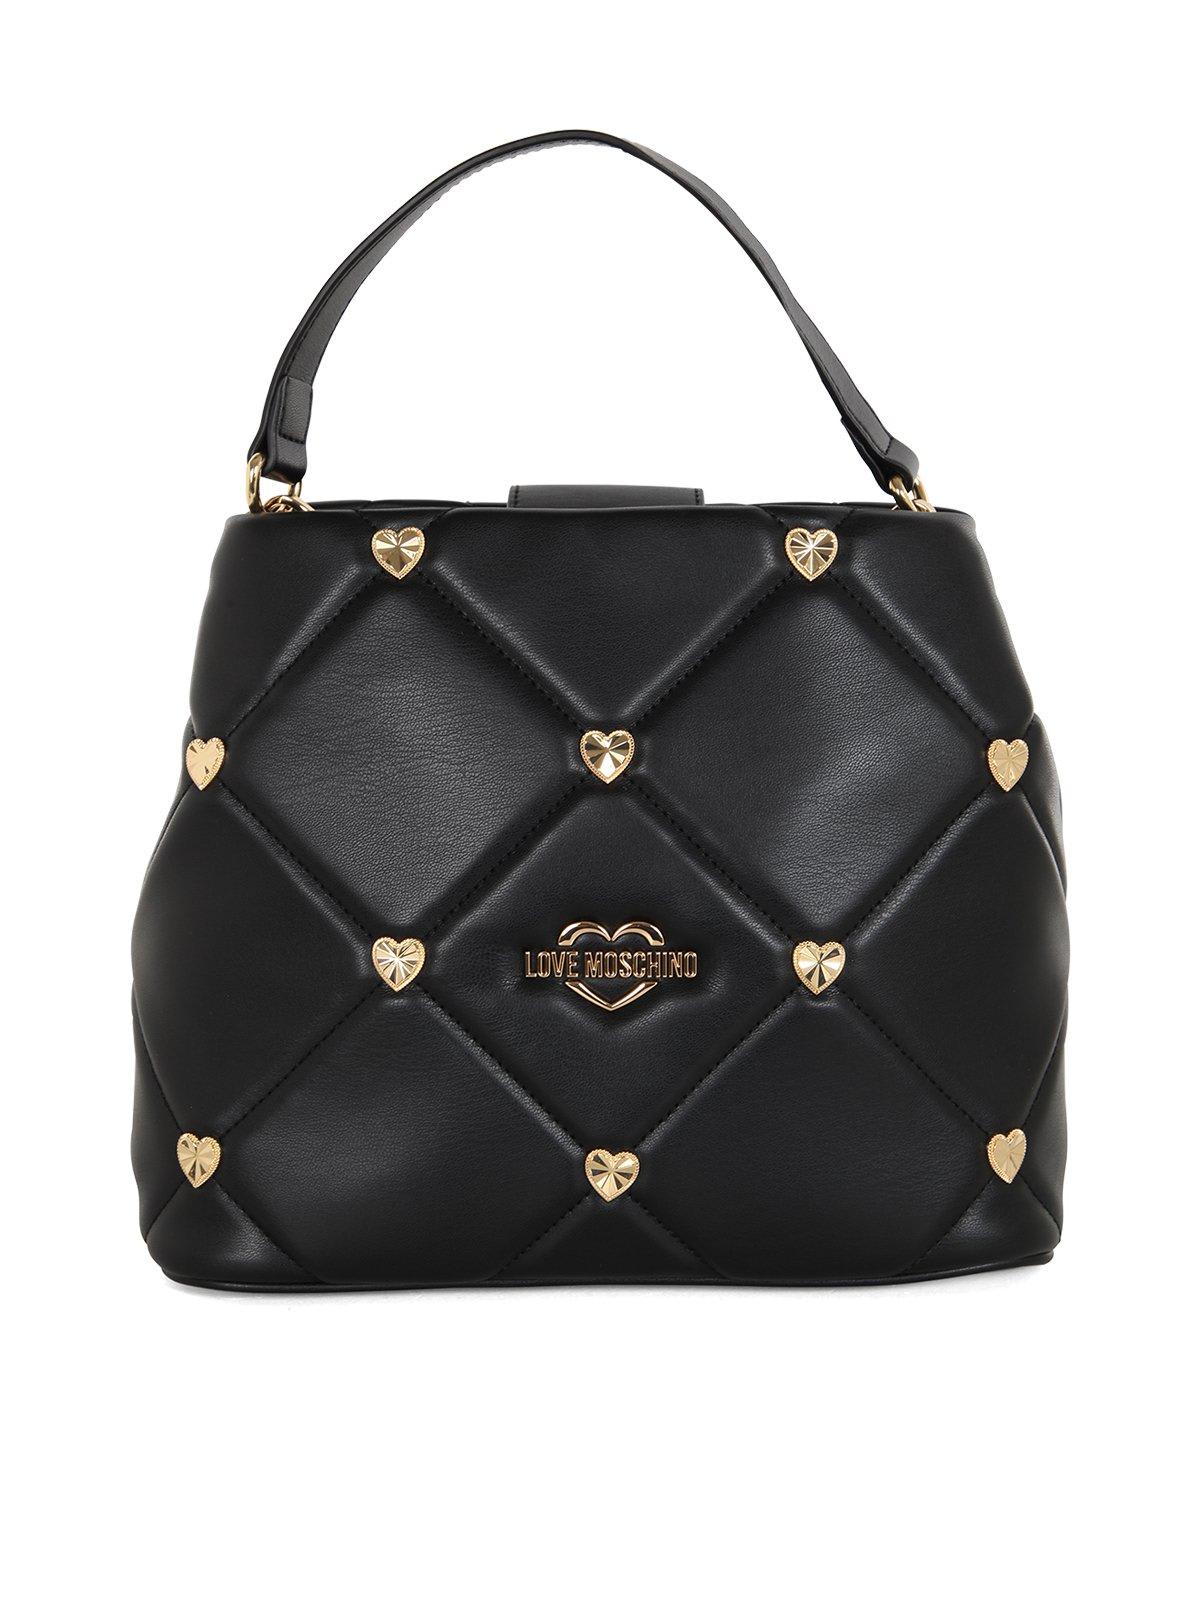 Love Moschino Heart Stud Embellished Tote Bag